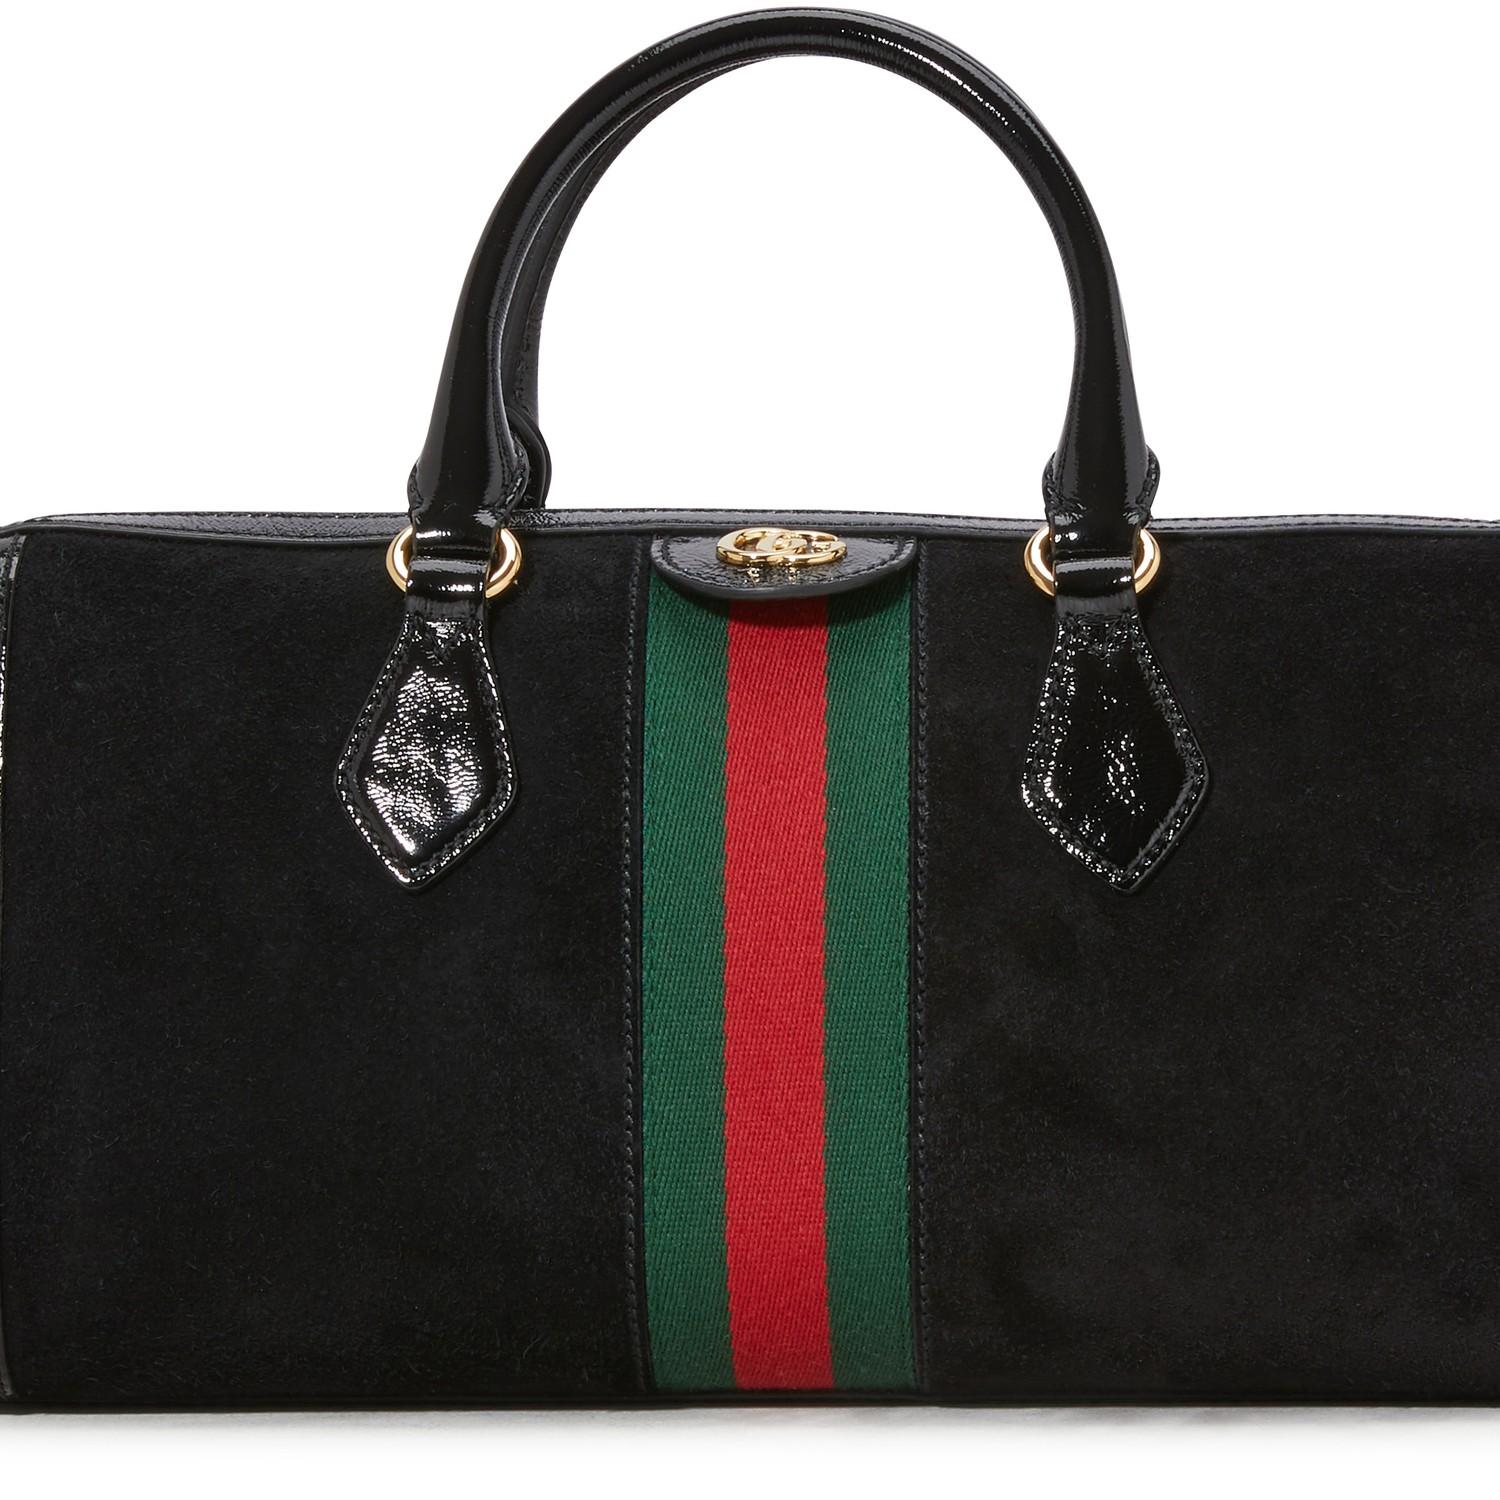 Gucci Ophidia Boston Suede Bag in Black - Save 17% - Lyst